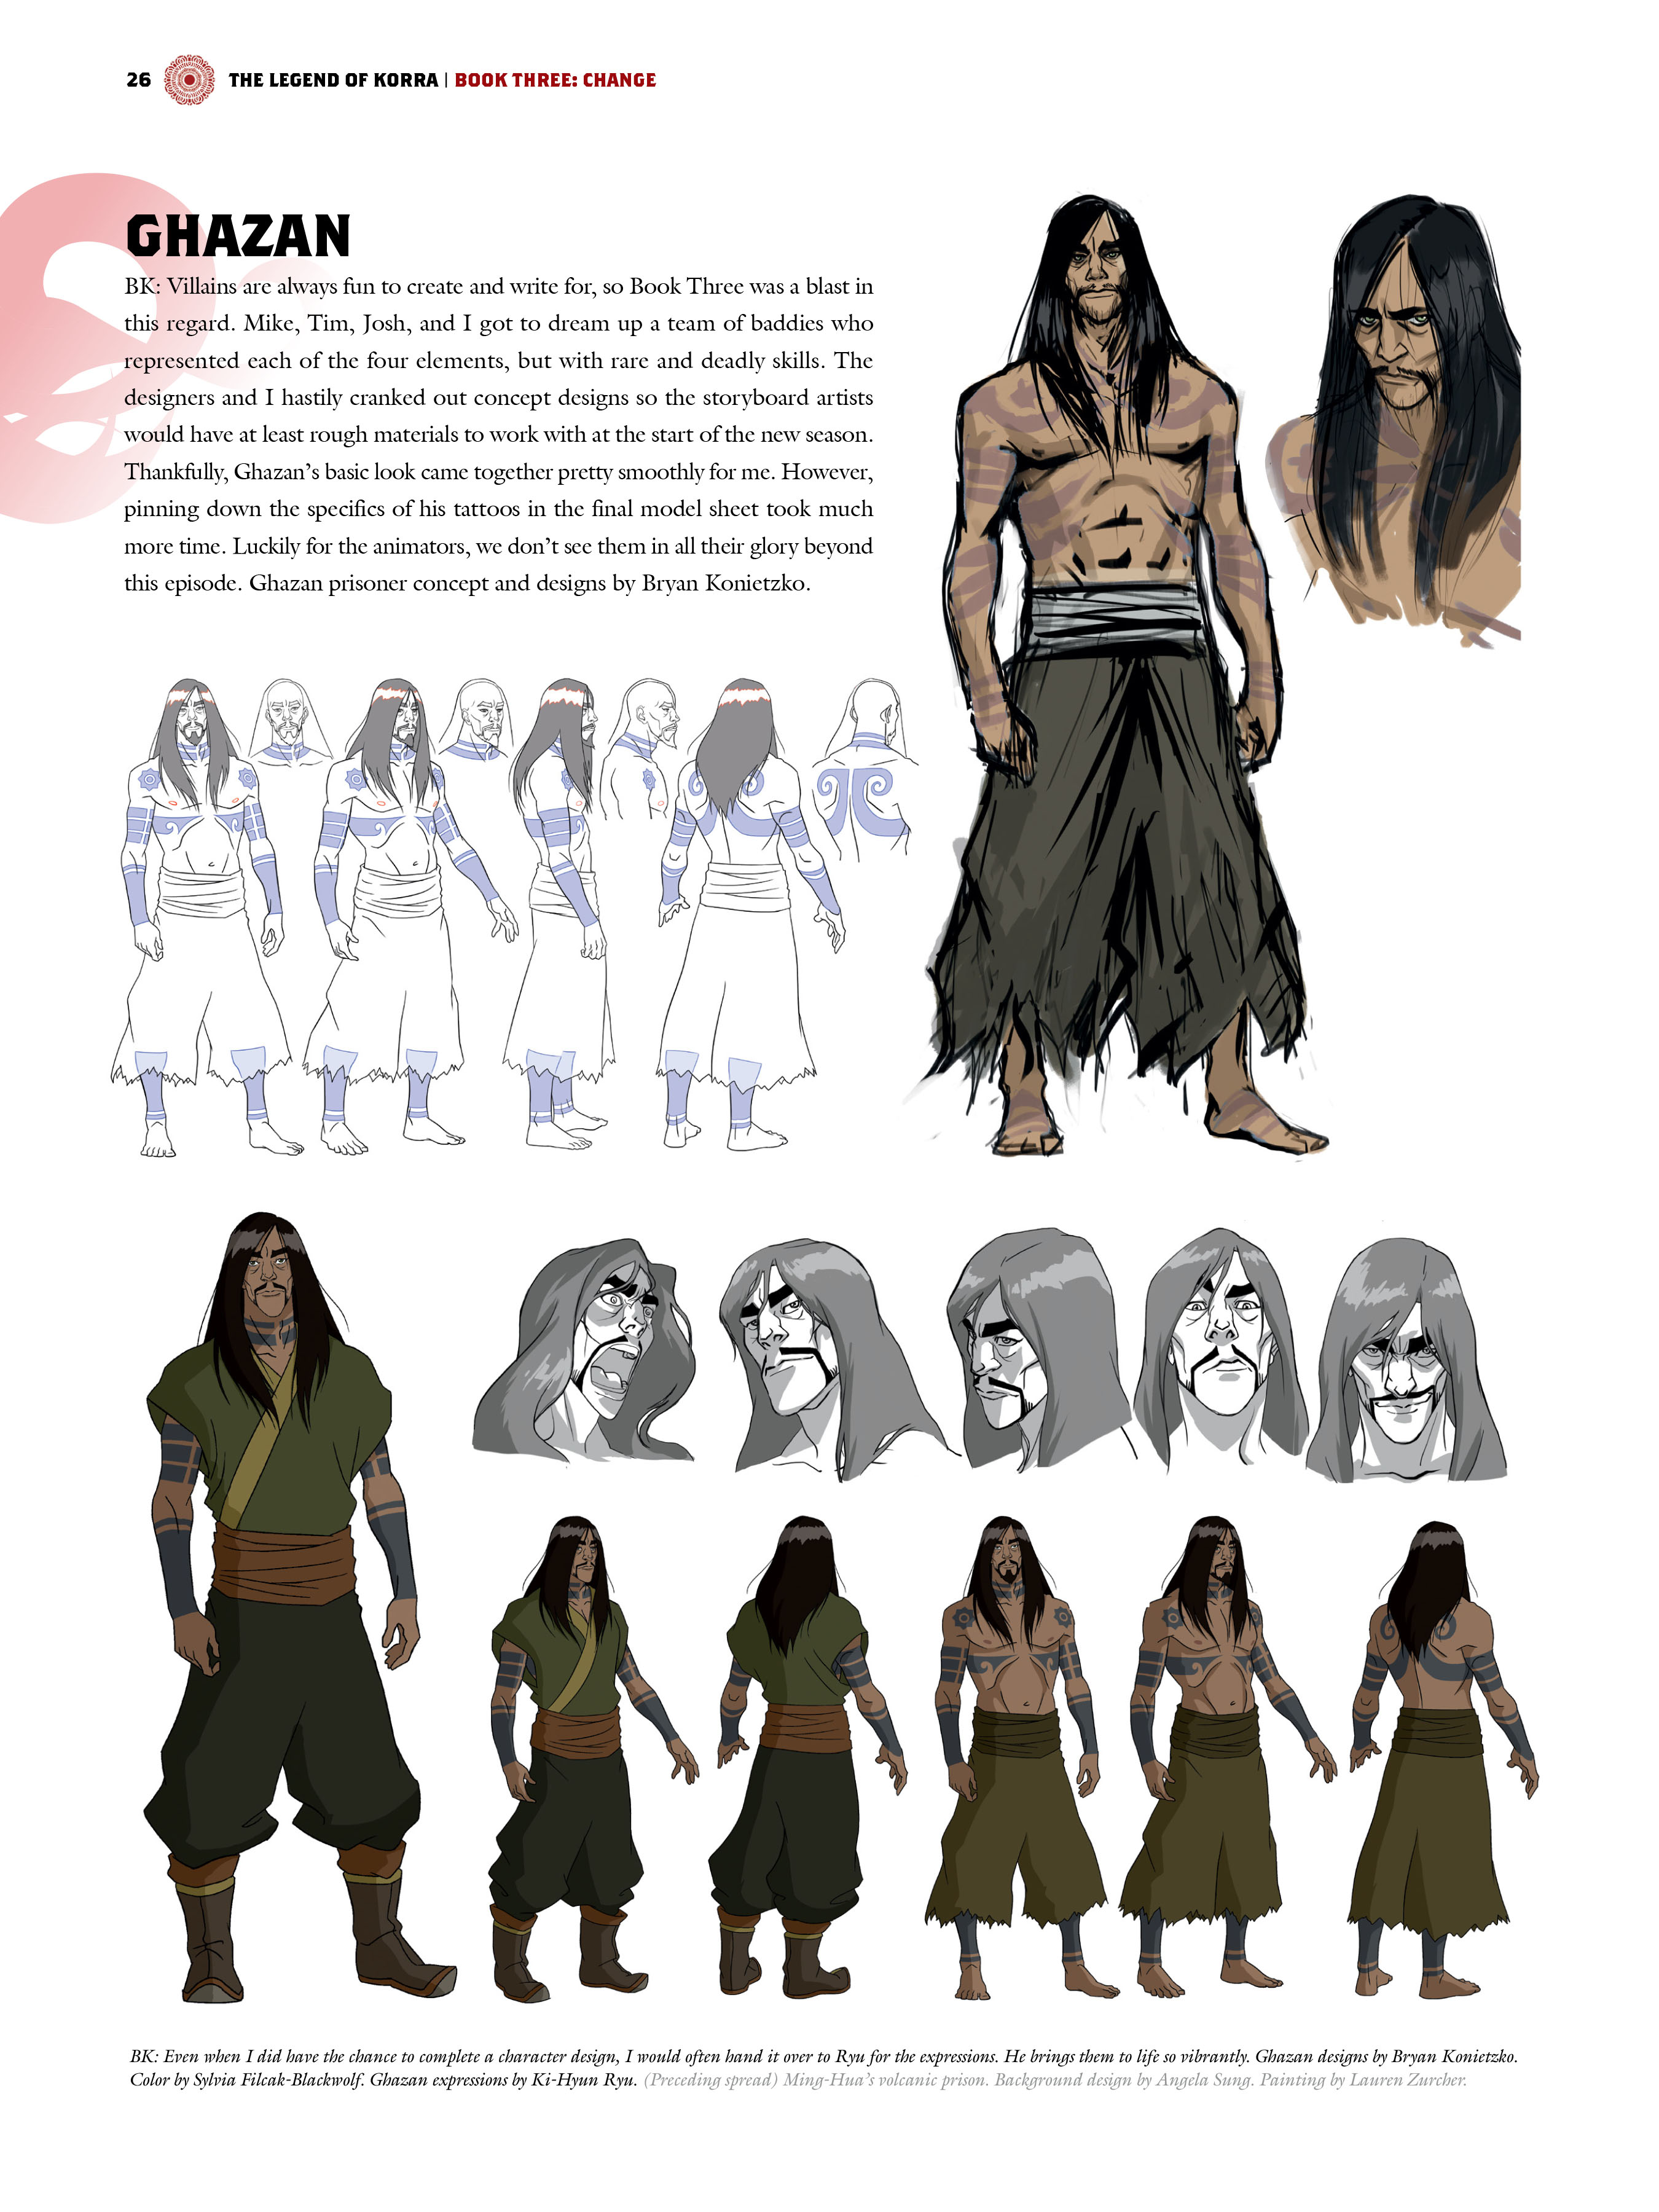 Read online The Legend of Korra: The Art of the Animated Series comic -  Issue # TPB 3 - 27